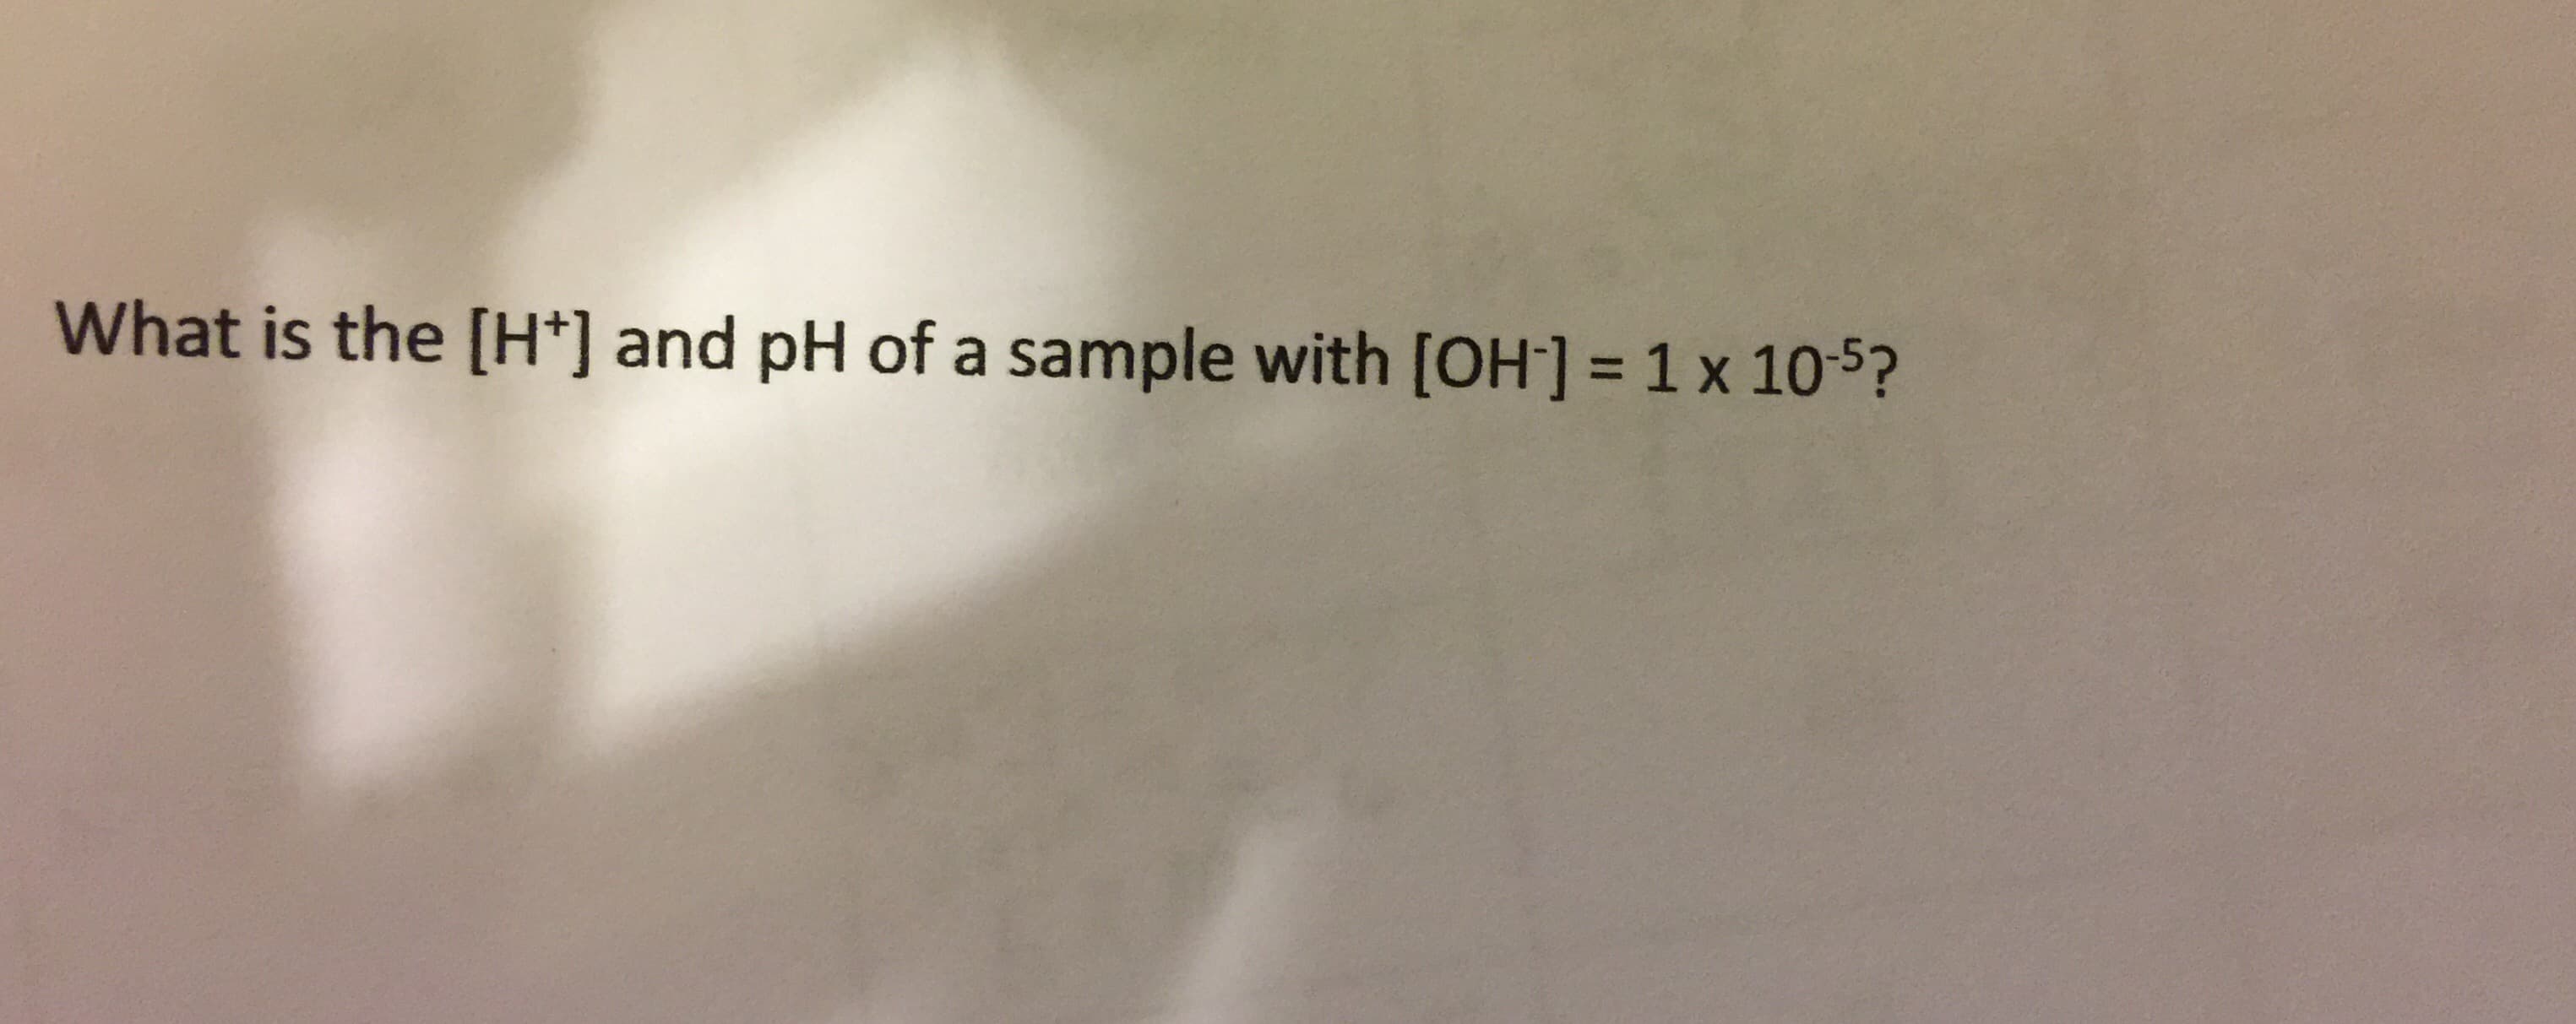 What is the [H*] and pH of a sample with [OH] = 1 x 105?
